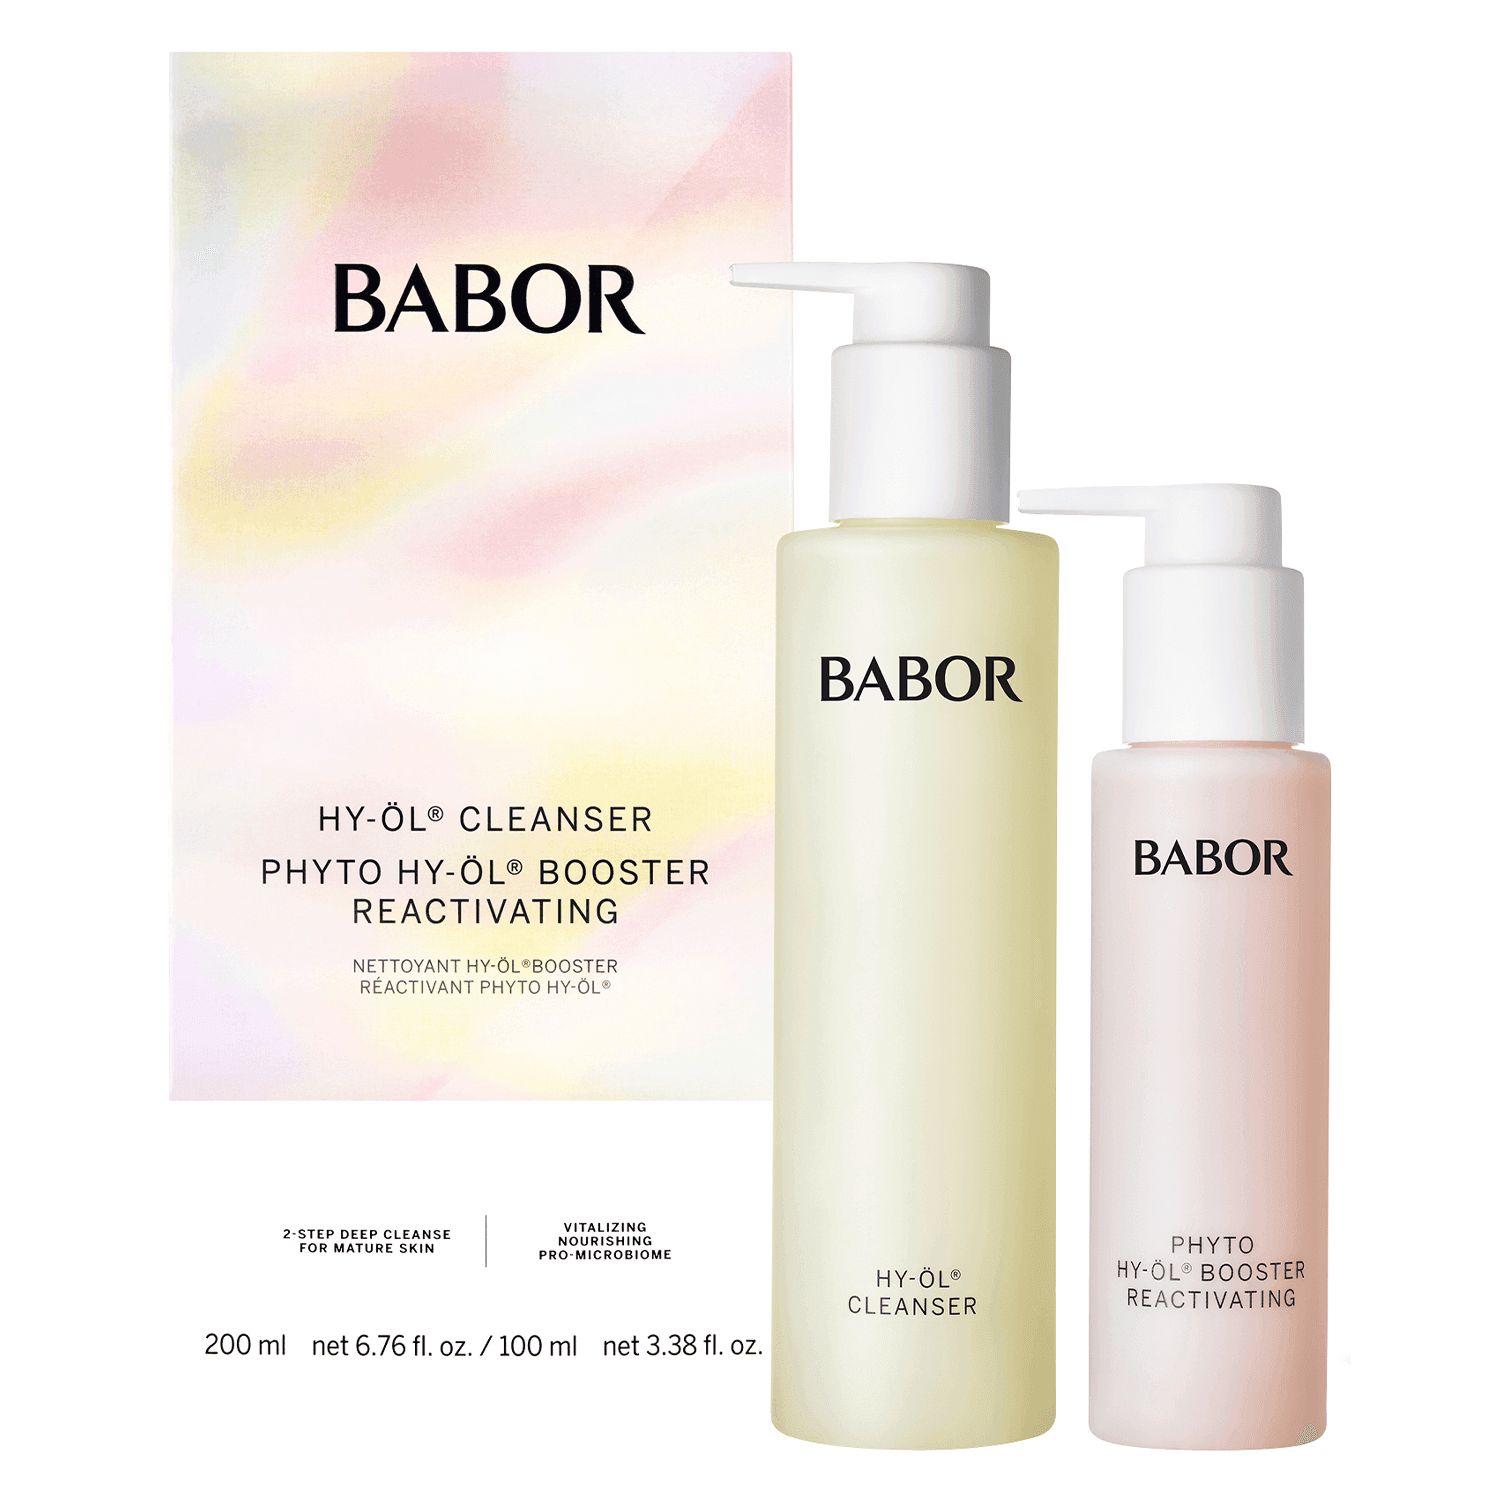 BABOR CLEANSING - HY-ÖL & Phyto Reactivating Set